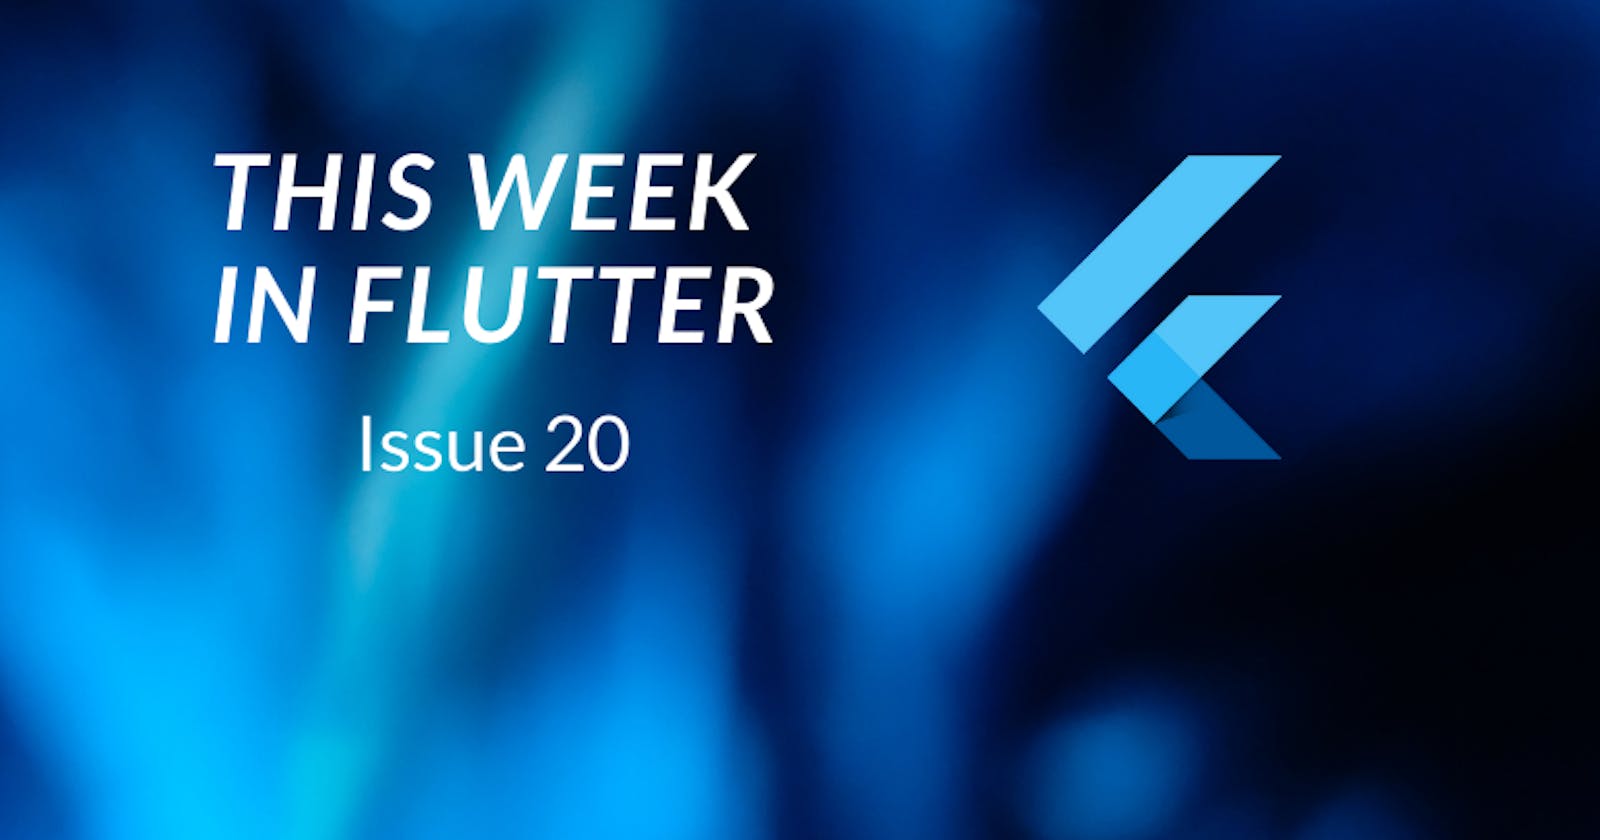 This week in Flutter #20